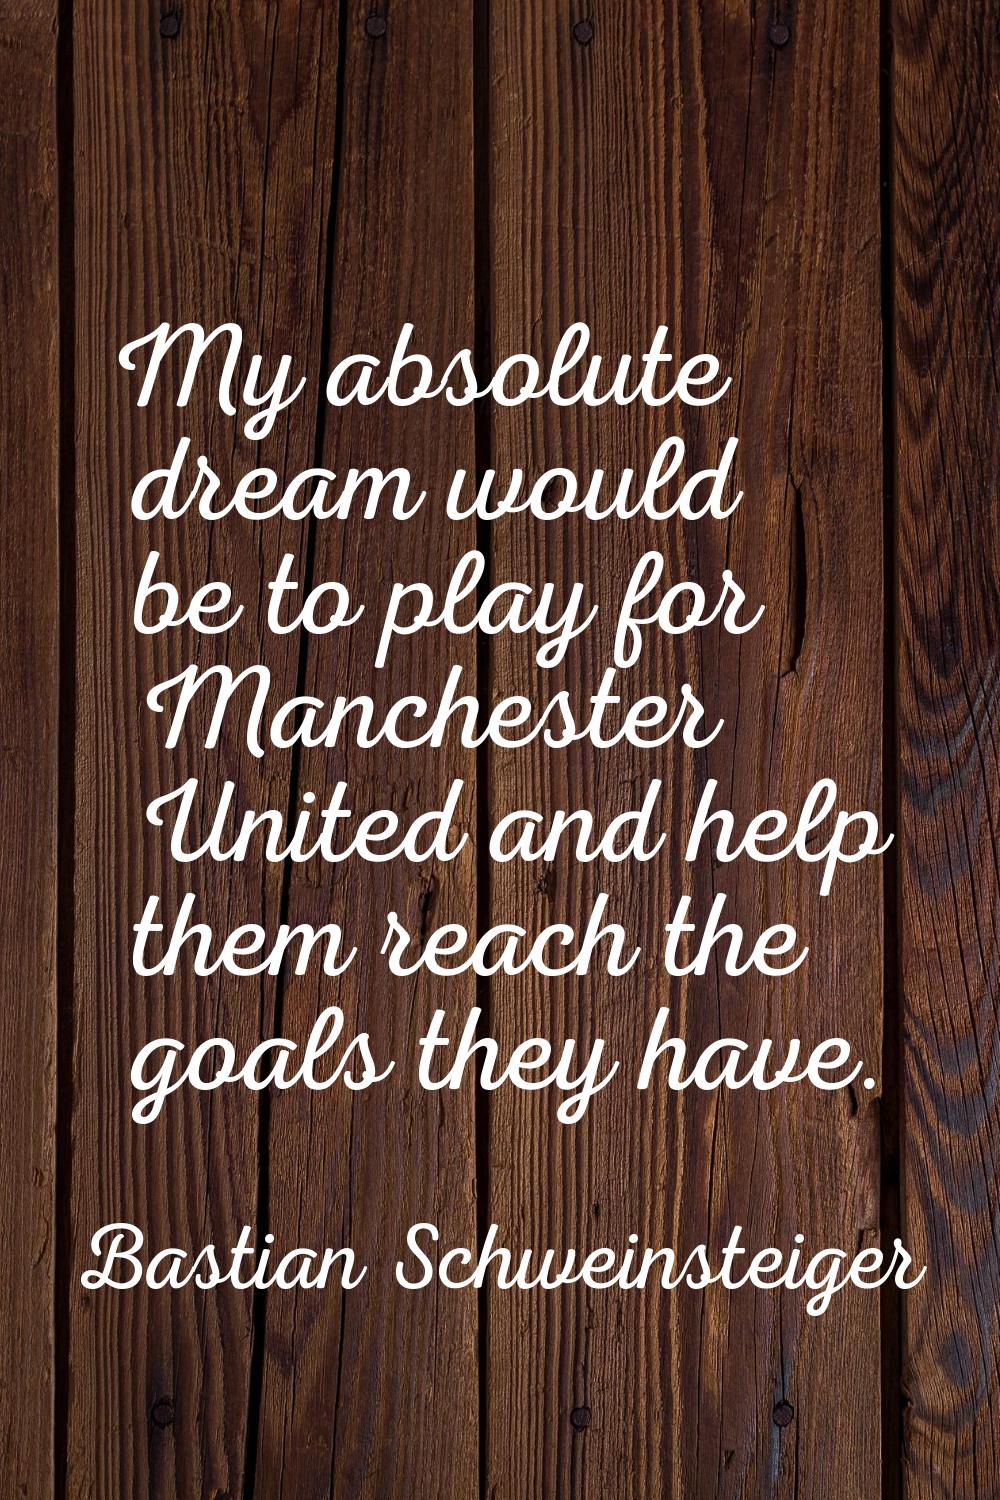 My absolute dream would be to play for Manchester United and help them reach the goals they have.